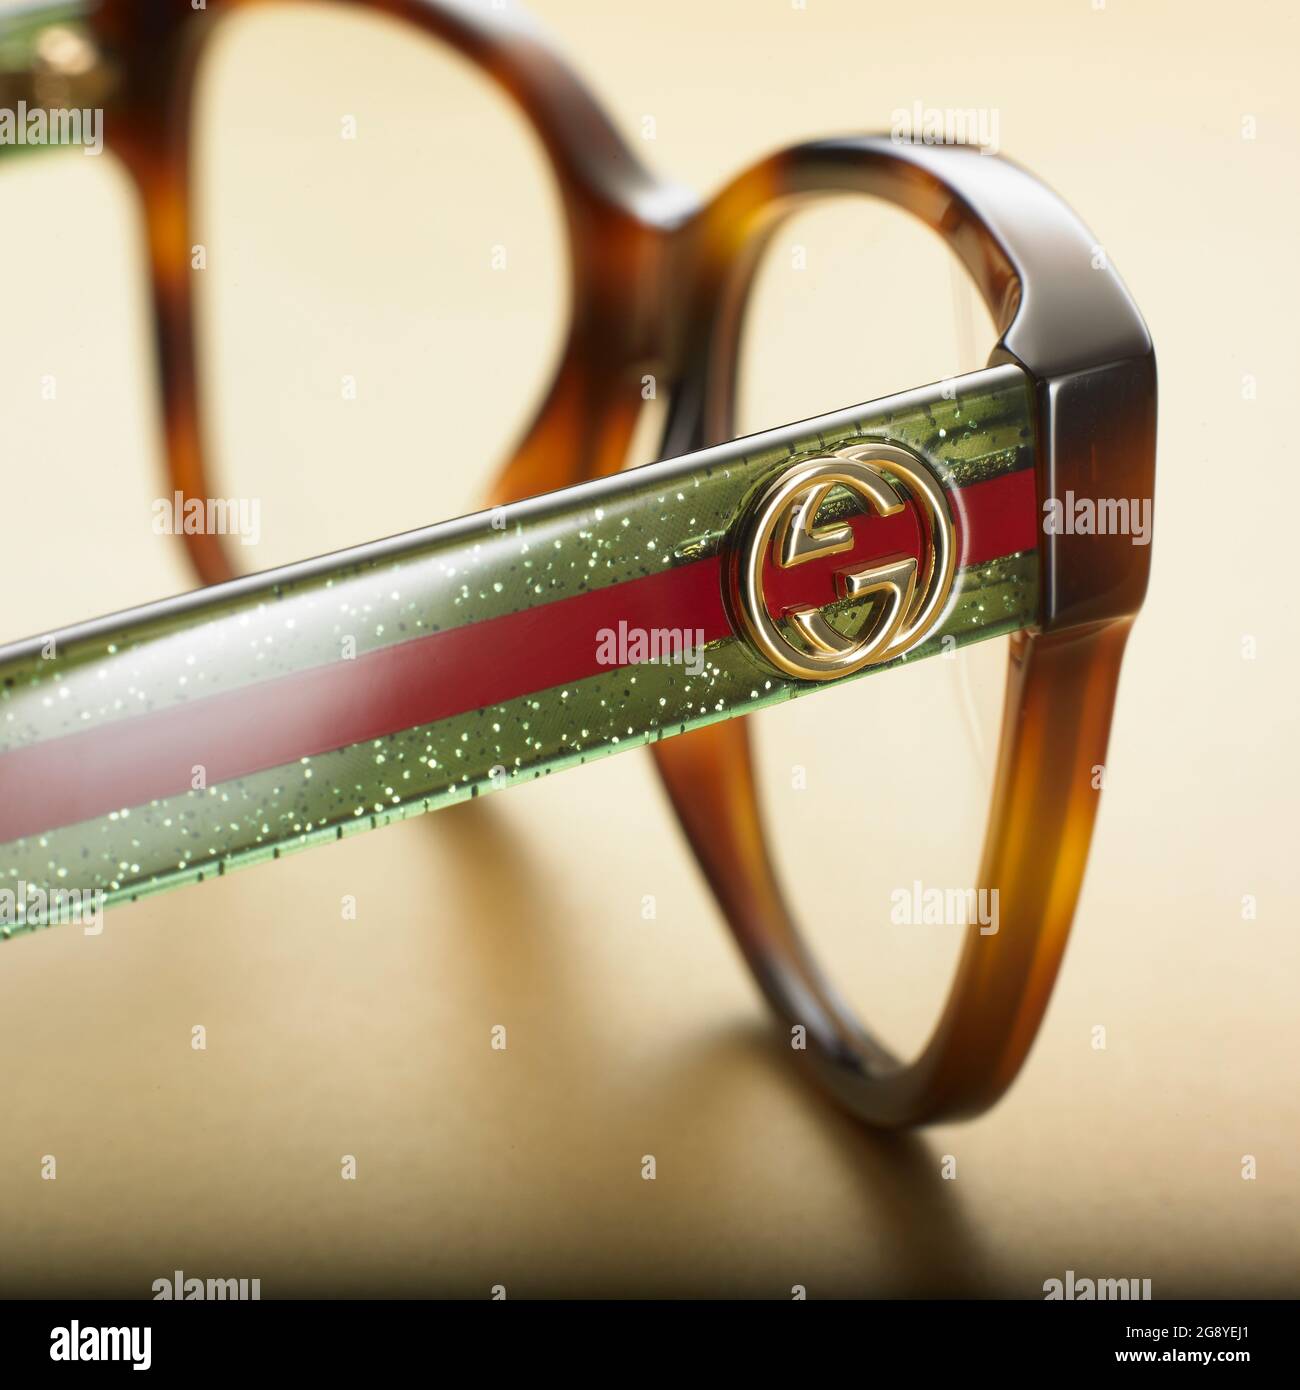 gucci spectacles